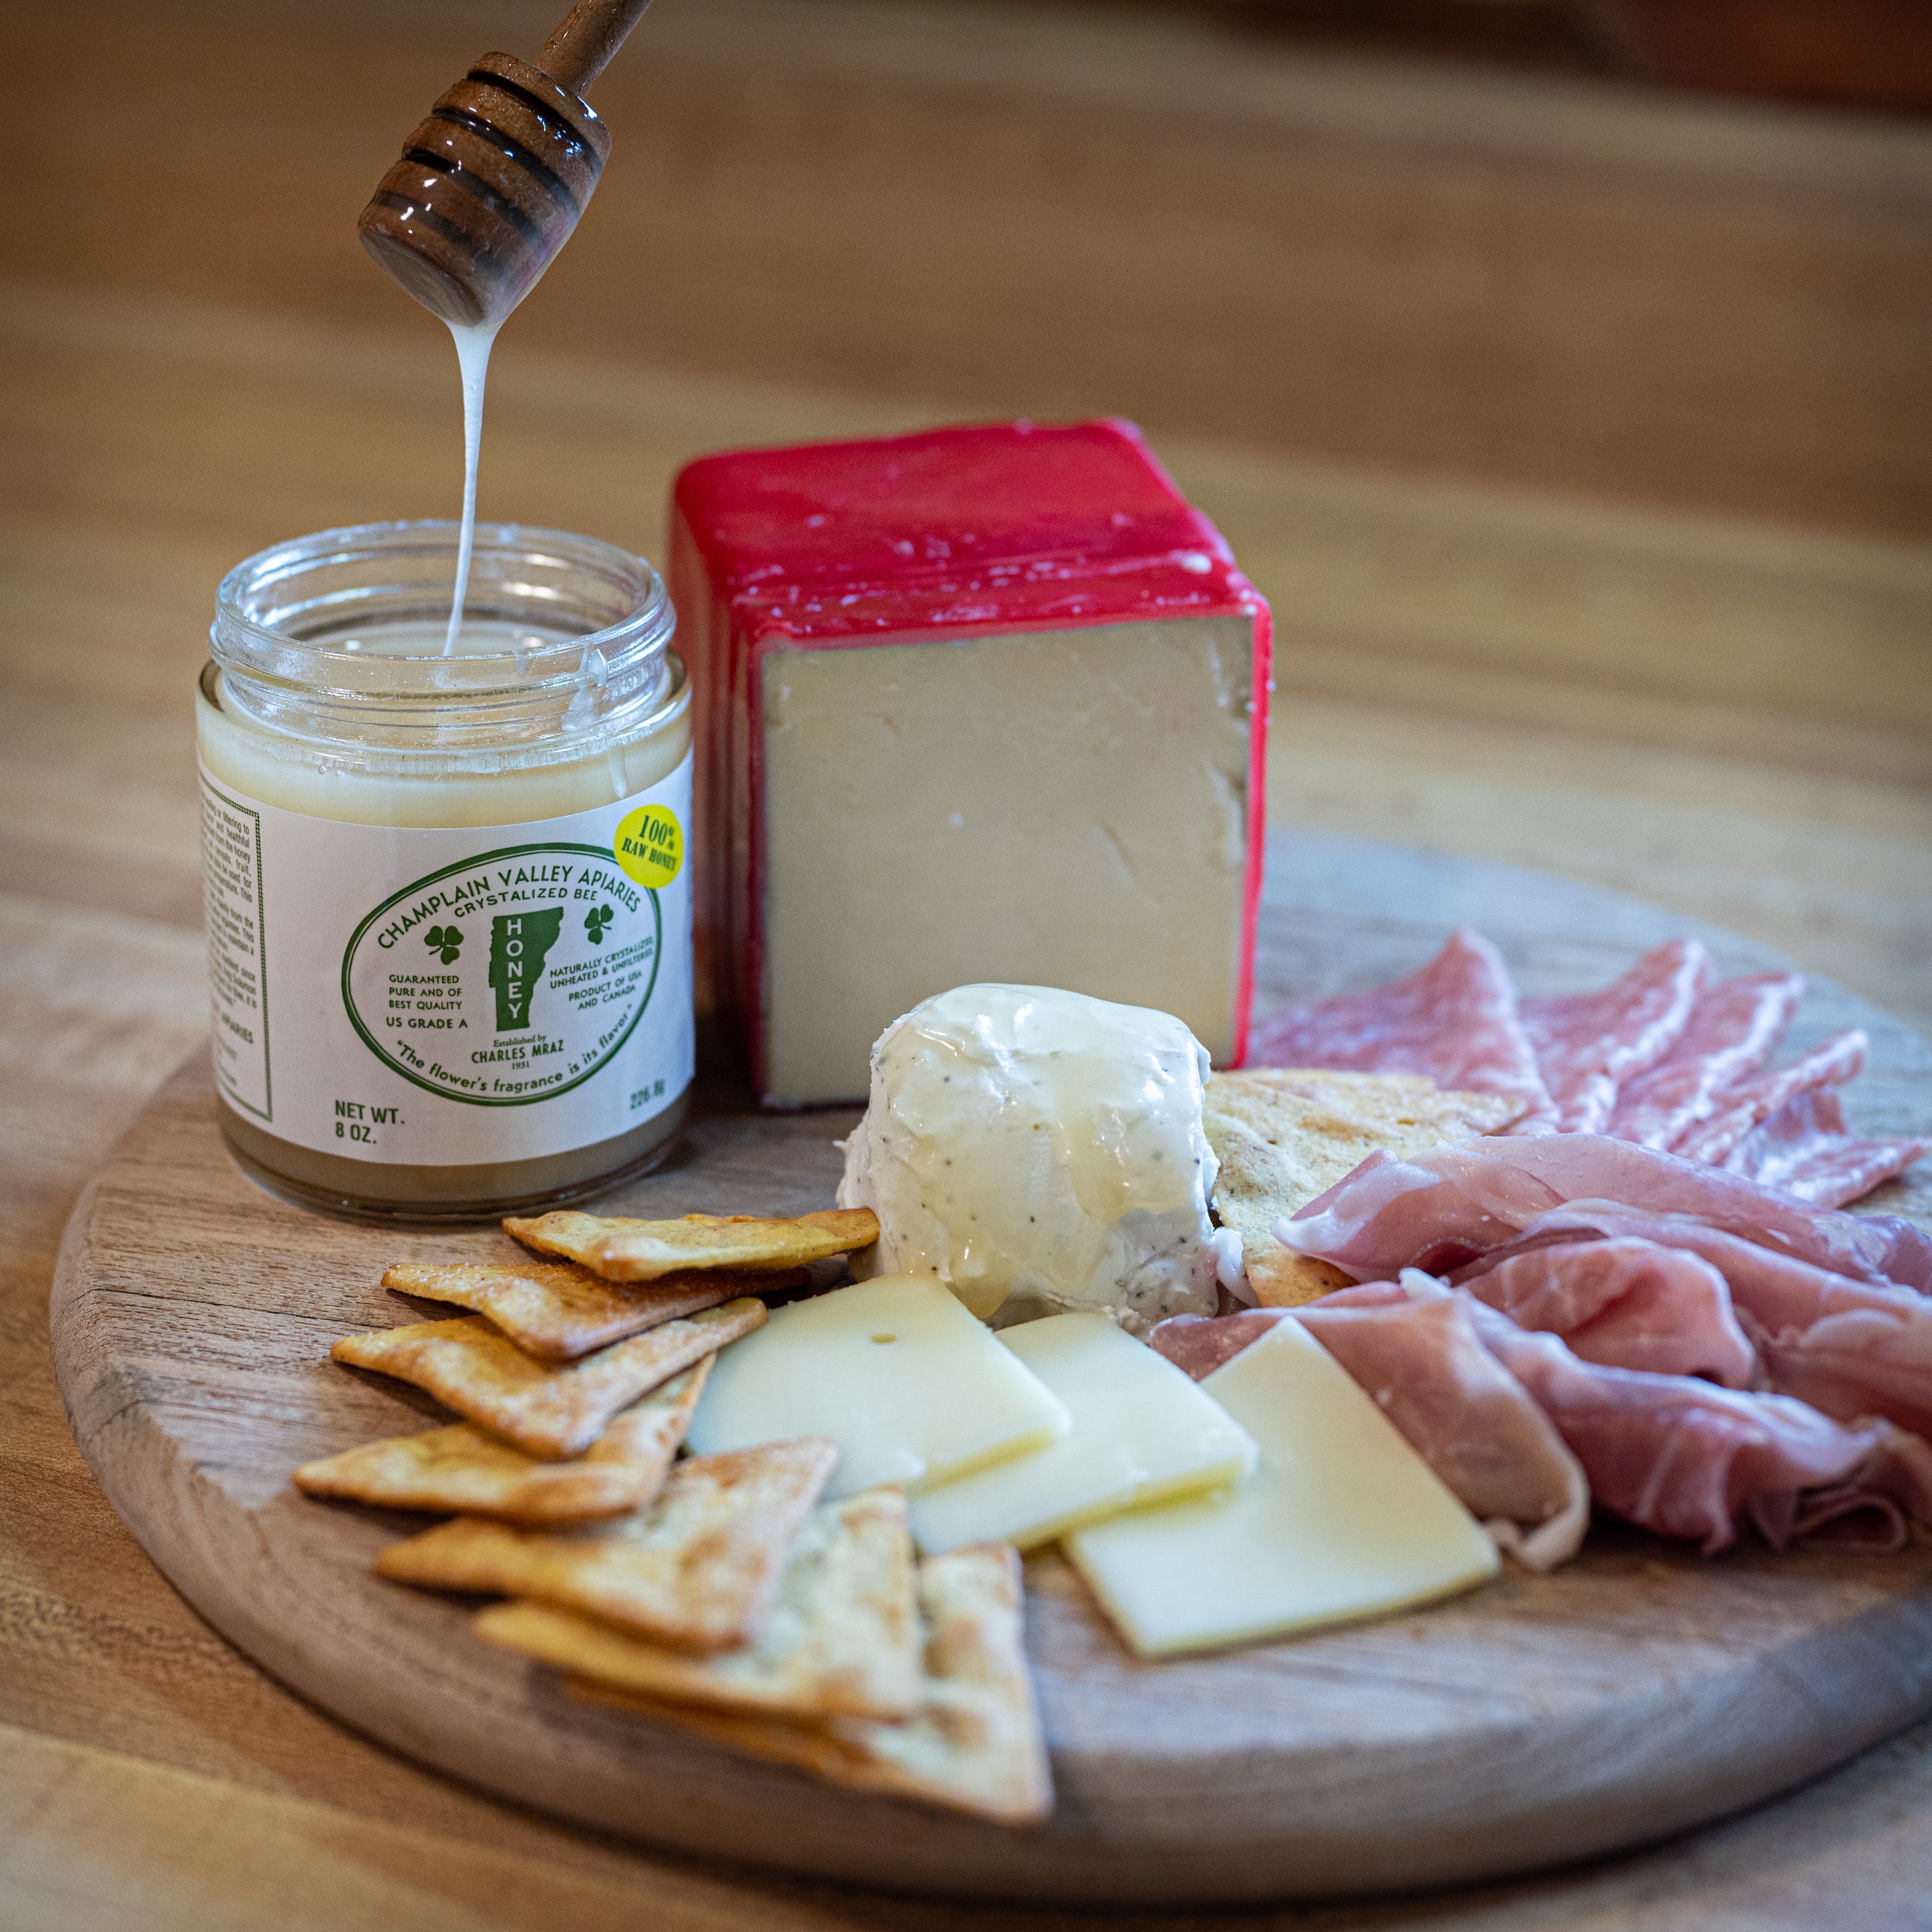 tableau of cheese, cracker and meat plate with a open jar of champlain valley apiaries raw honey